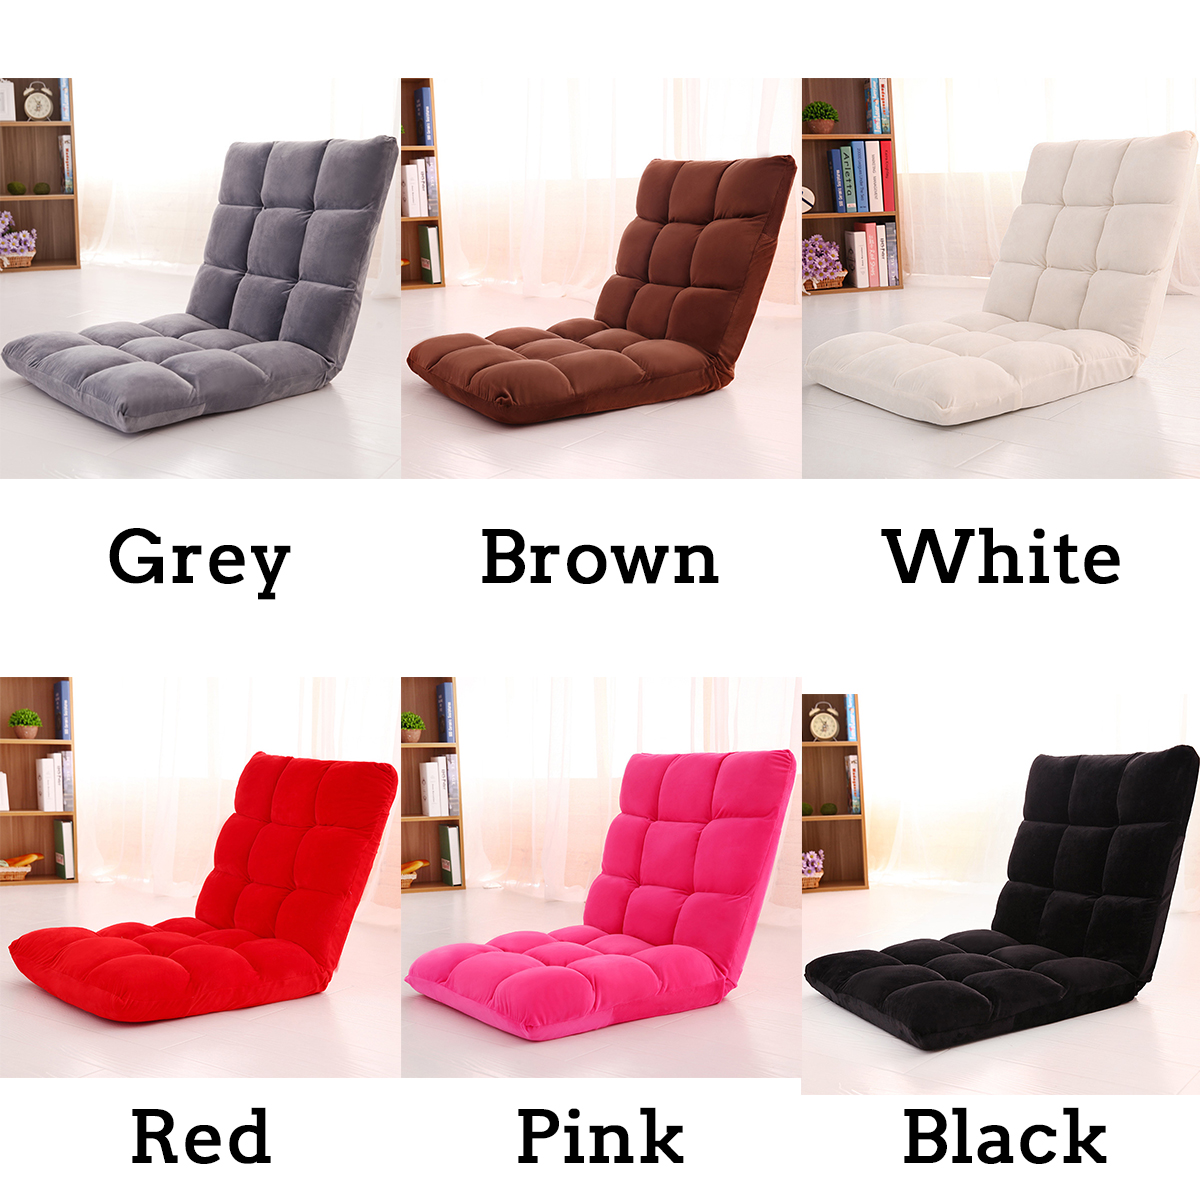 Adjustable Lazy Sofa Cushioned Floor Lounge Chair Living Room Leisure Chaise Chair 6